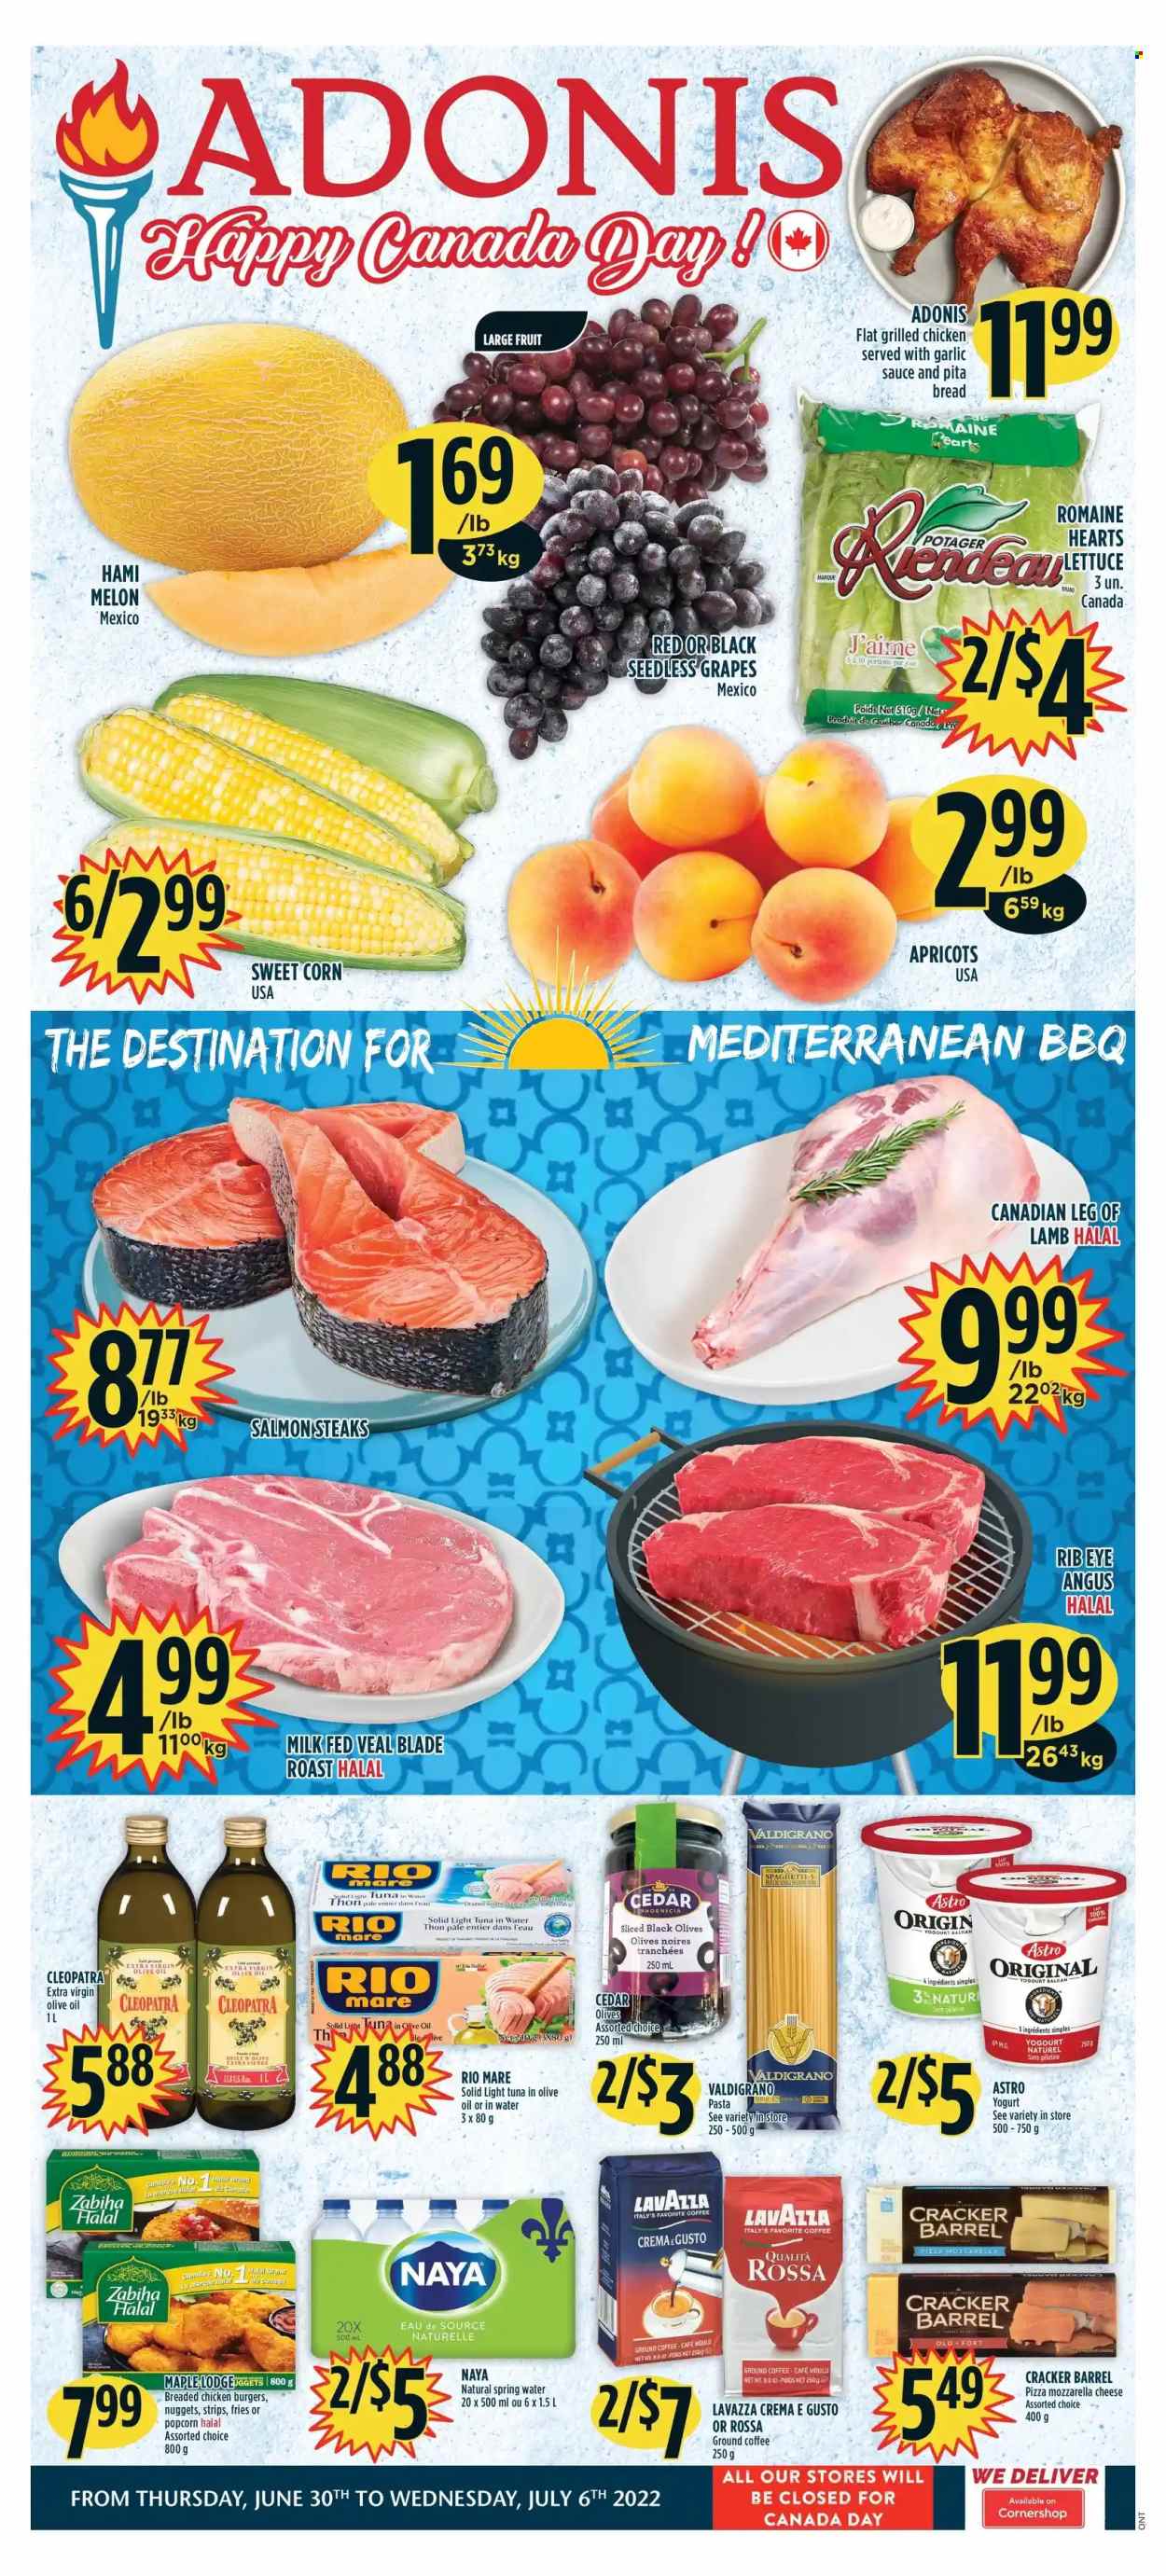 thumbnail - Adonis Flyer - June 30, 2022 - July 06, 2022 - Sales products - pita, corn, grapes, seedless grapes, melons, apricots, salmon, tuna, spaghetti, pizza, nuggets, hamburger, pasta, fried chicken, yoghurt, milk, potato fries, crackers, popcorn, tuna in water, light tuna, garlic sauce, extra virgin olive oil, spring water, coffee, ground coffee, Lavazza, beef meat, lamb leg, olives, steak. Page 1.